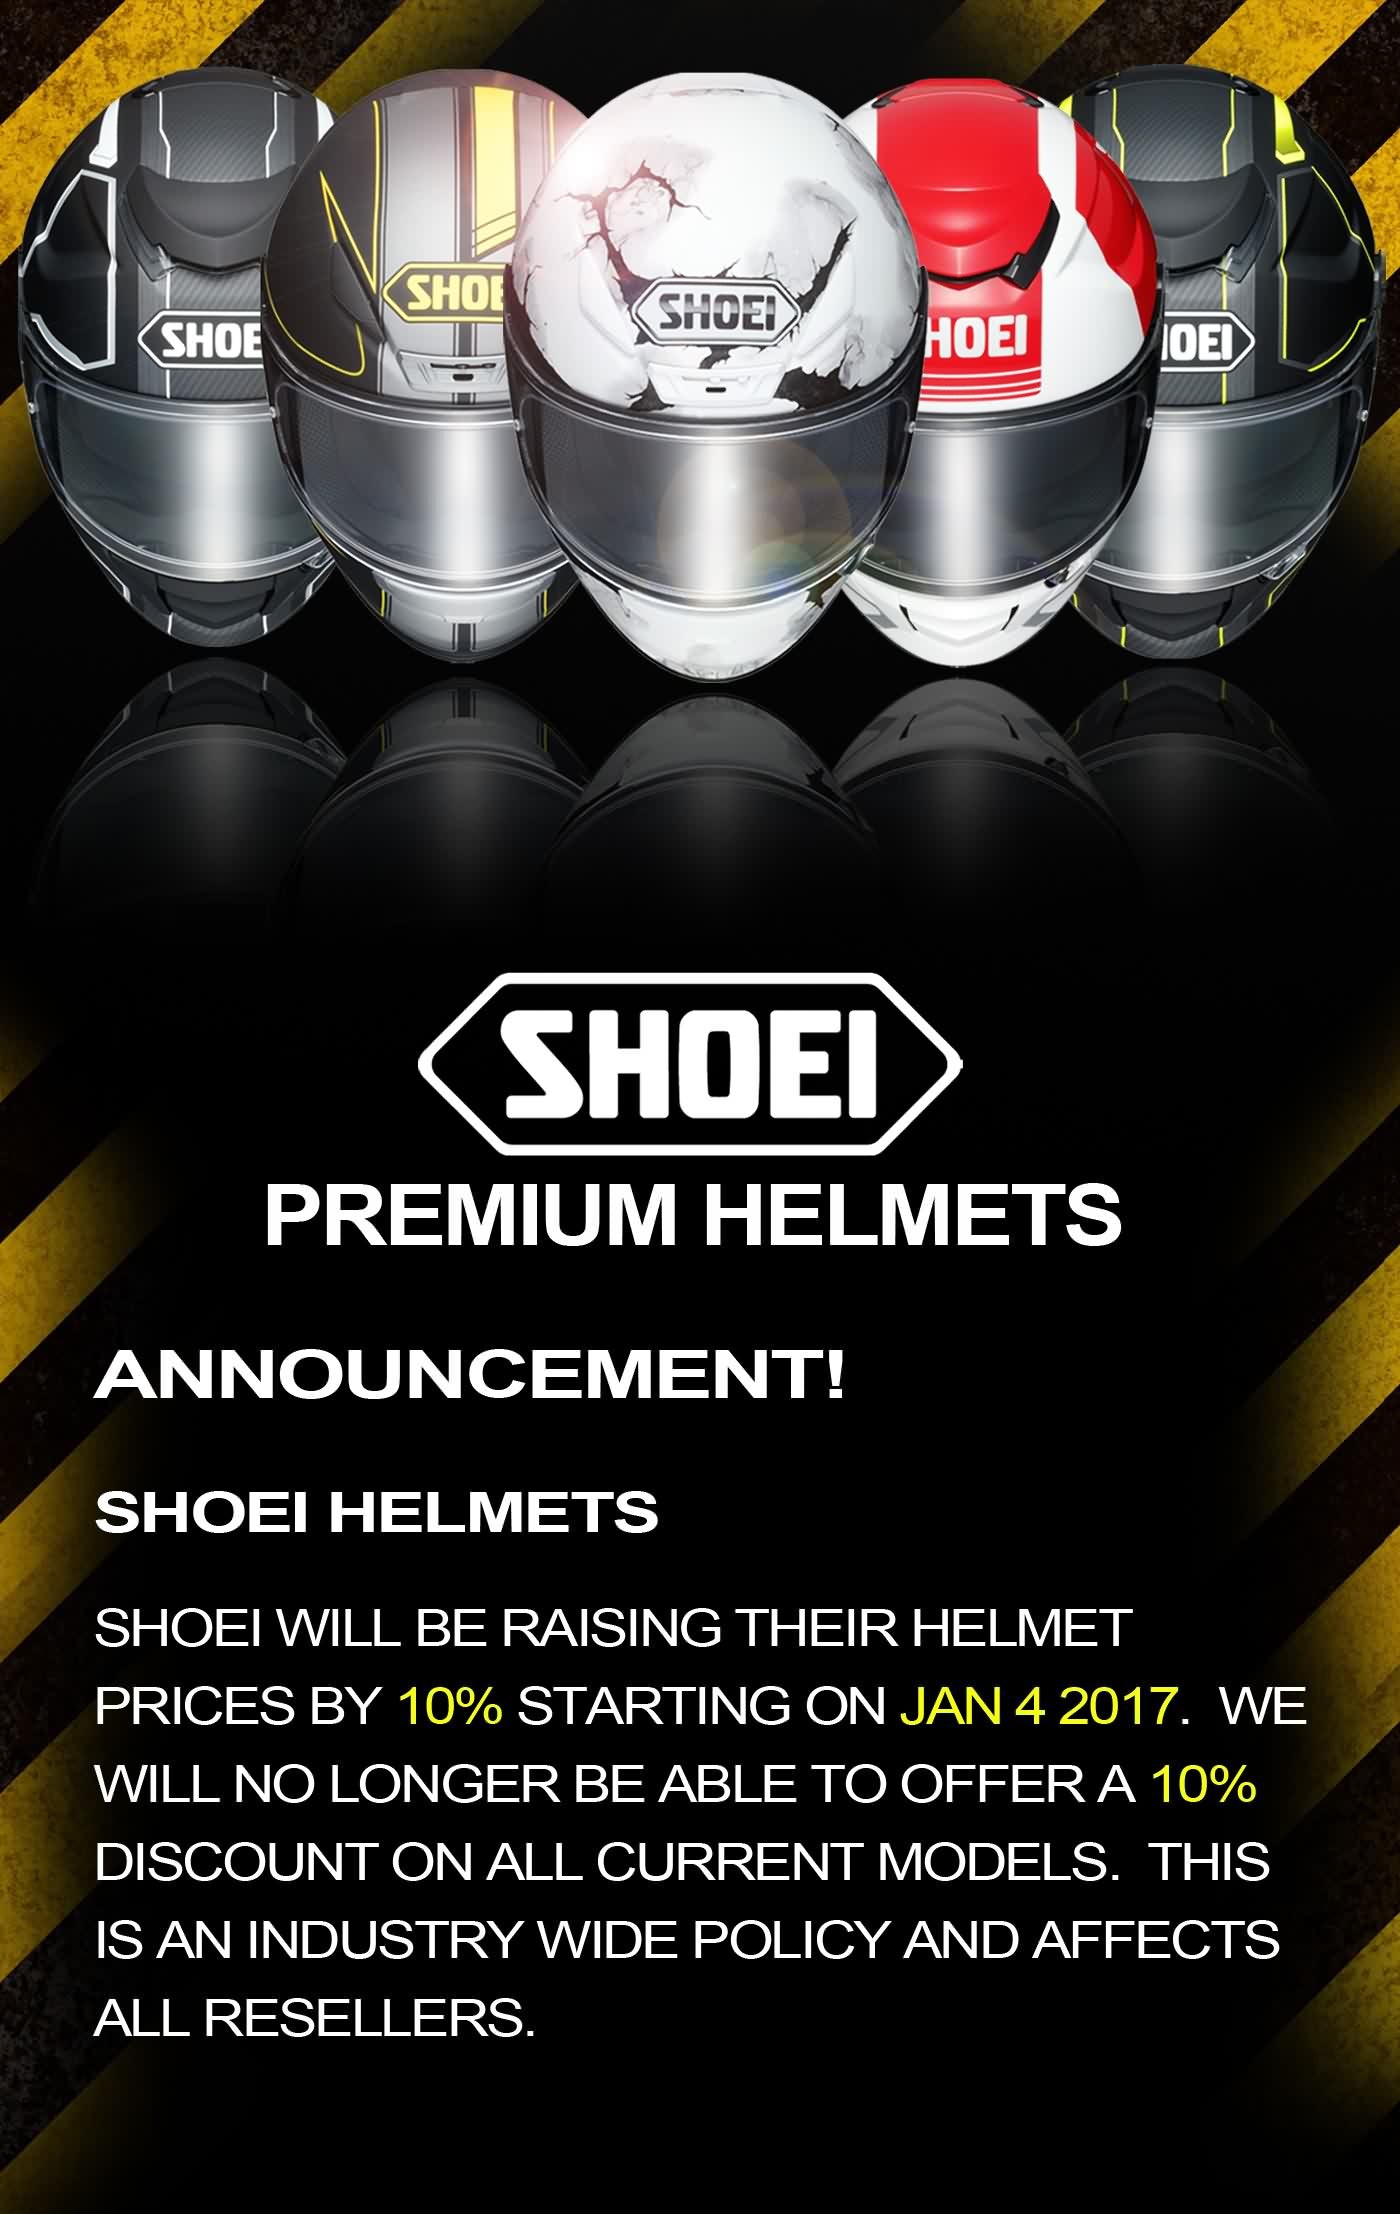 Shoei Helmet Price Increases Scheduled for January 4th 2017